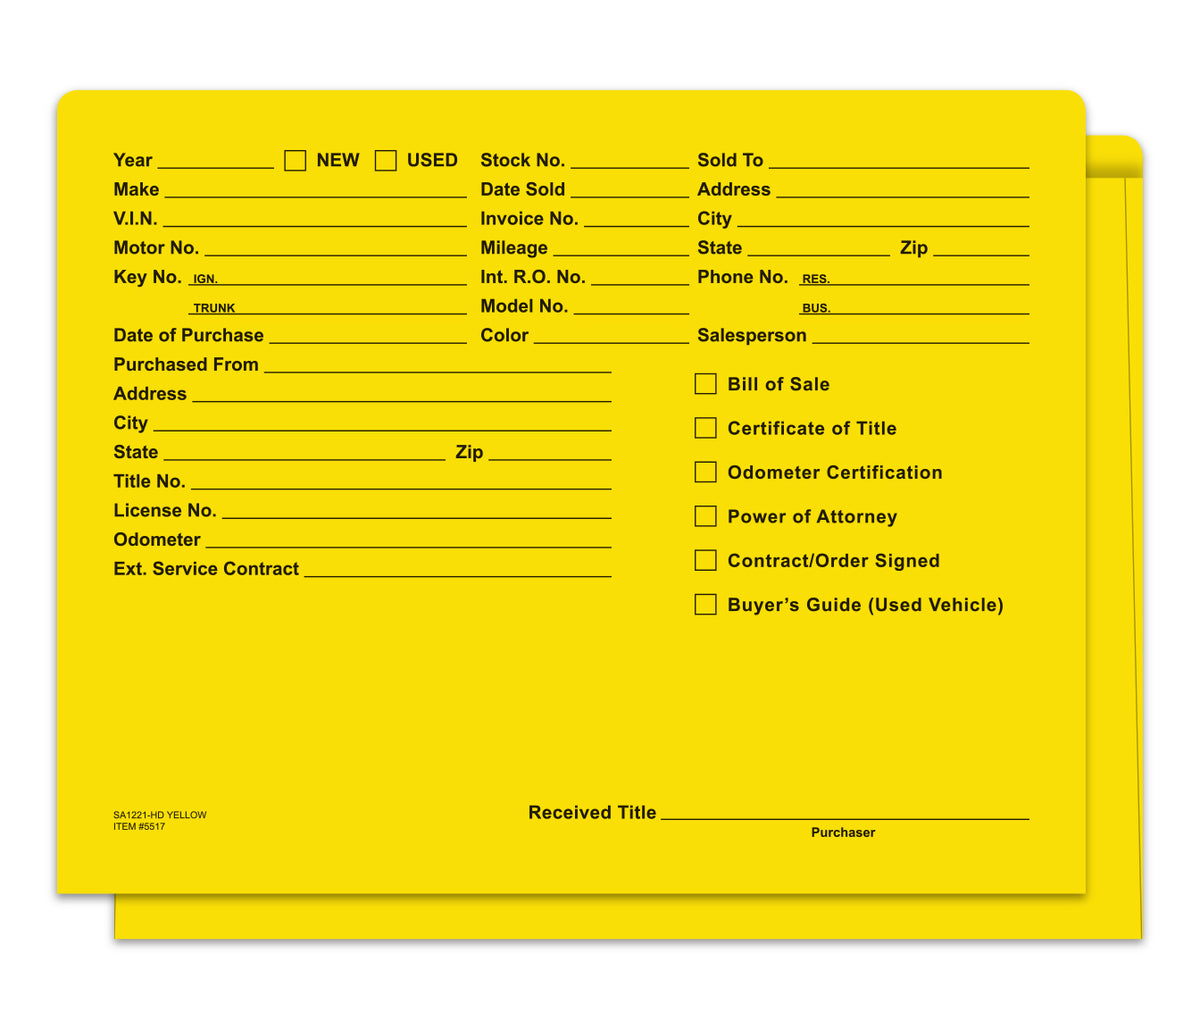 Heavy Duty Deal Envelopes Printed in Yellow; image is a yellow colored deal envelope with black writing on it. www.flywheelnw.com